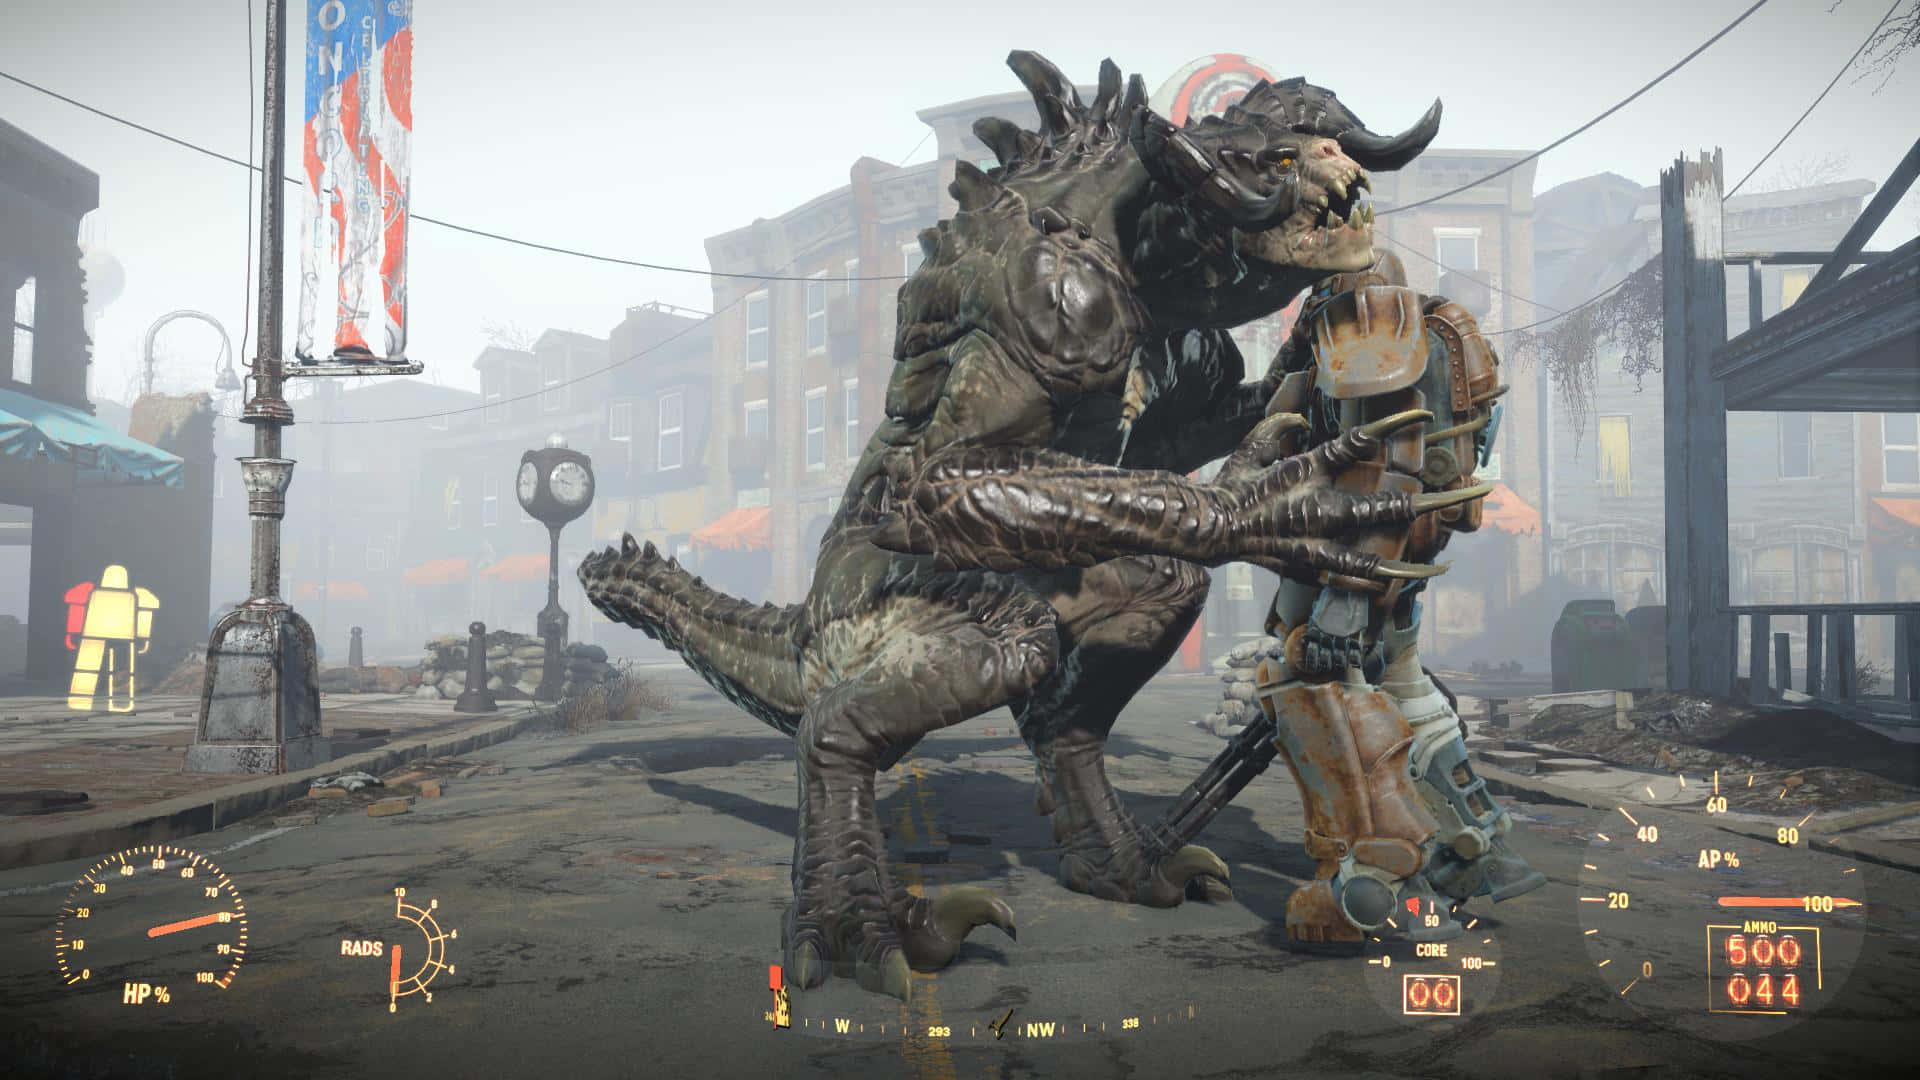 Ferocious Deathclaw in the Wasteland Wallpaper